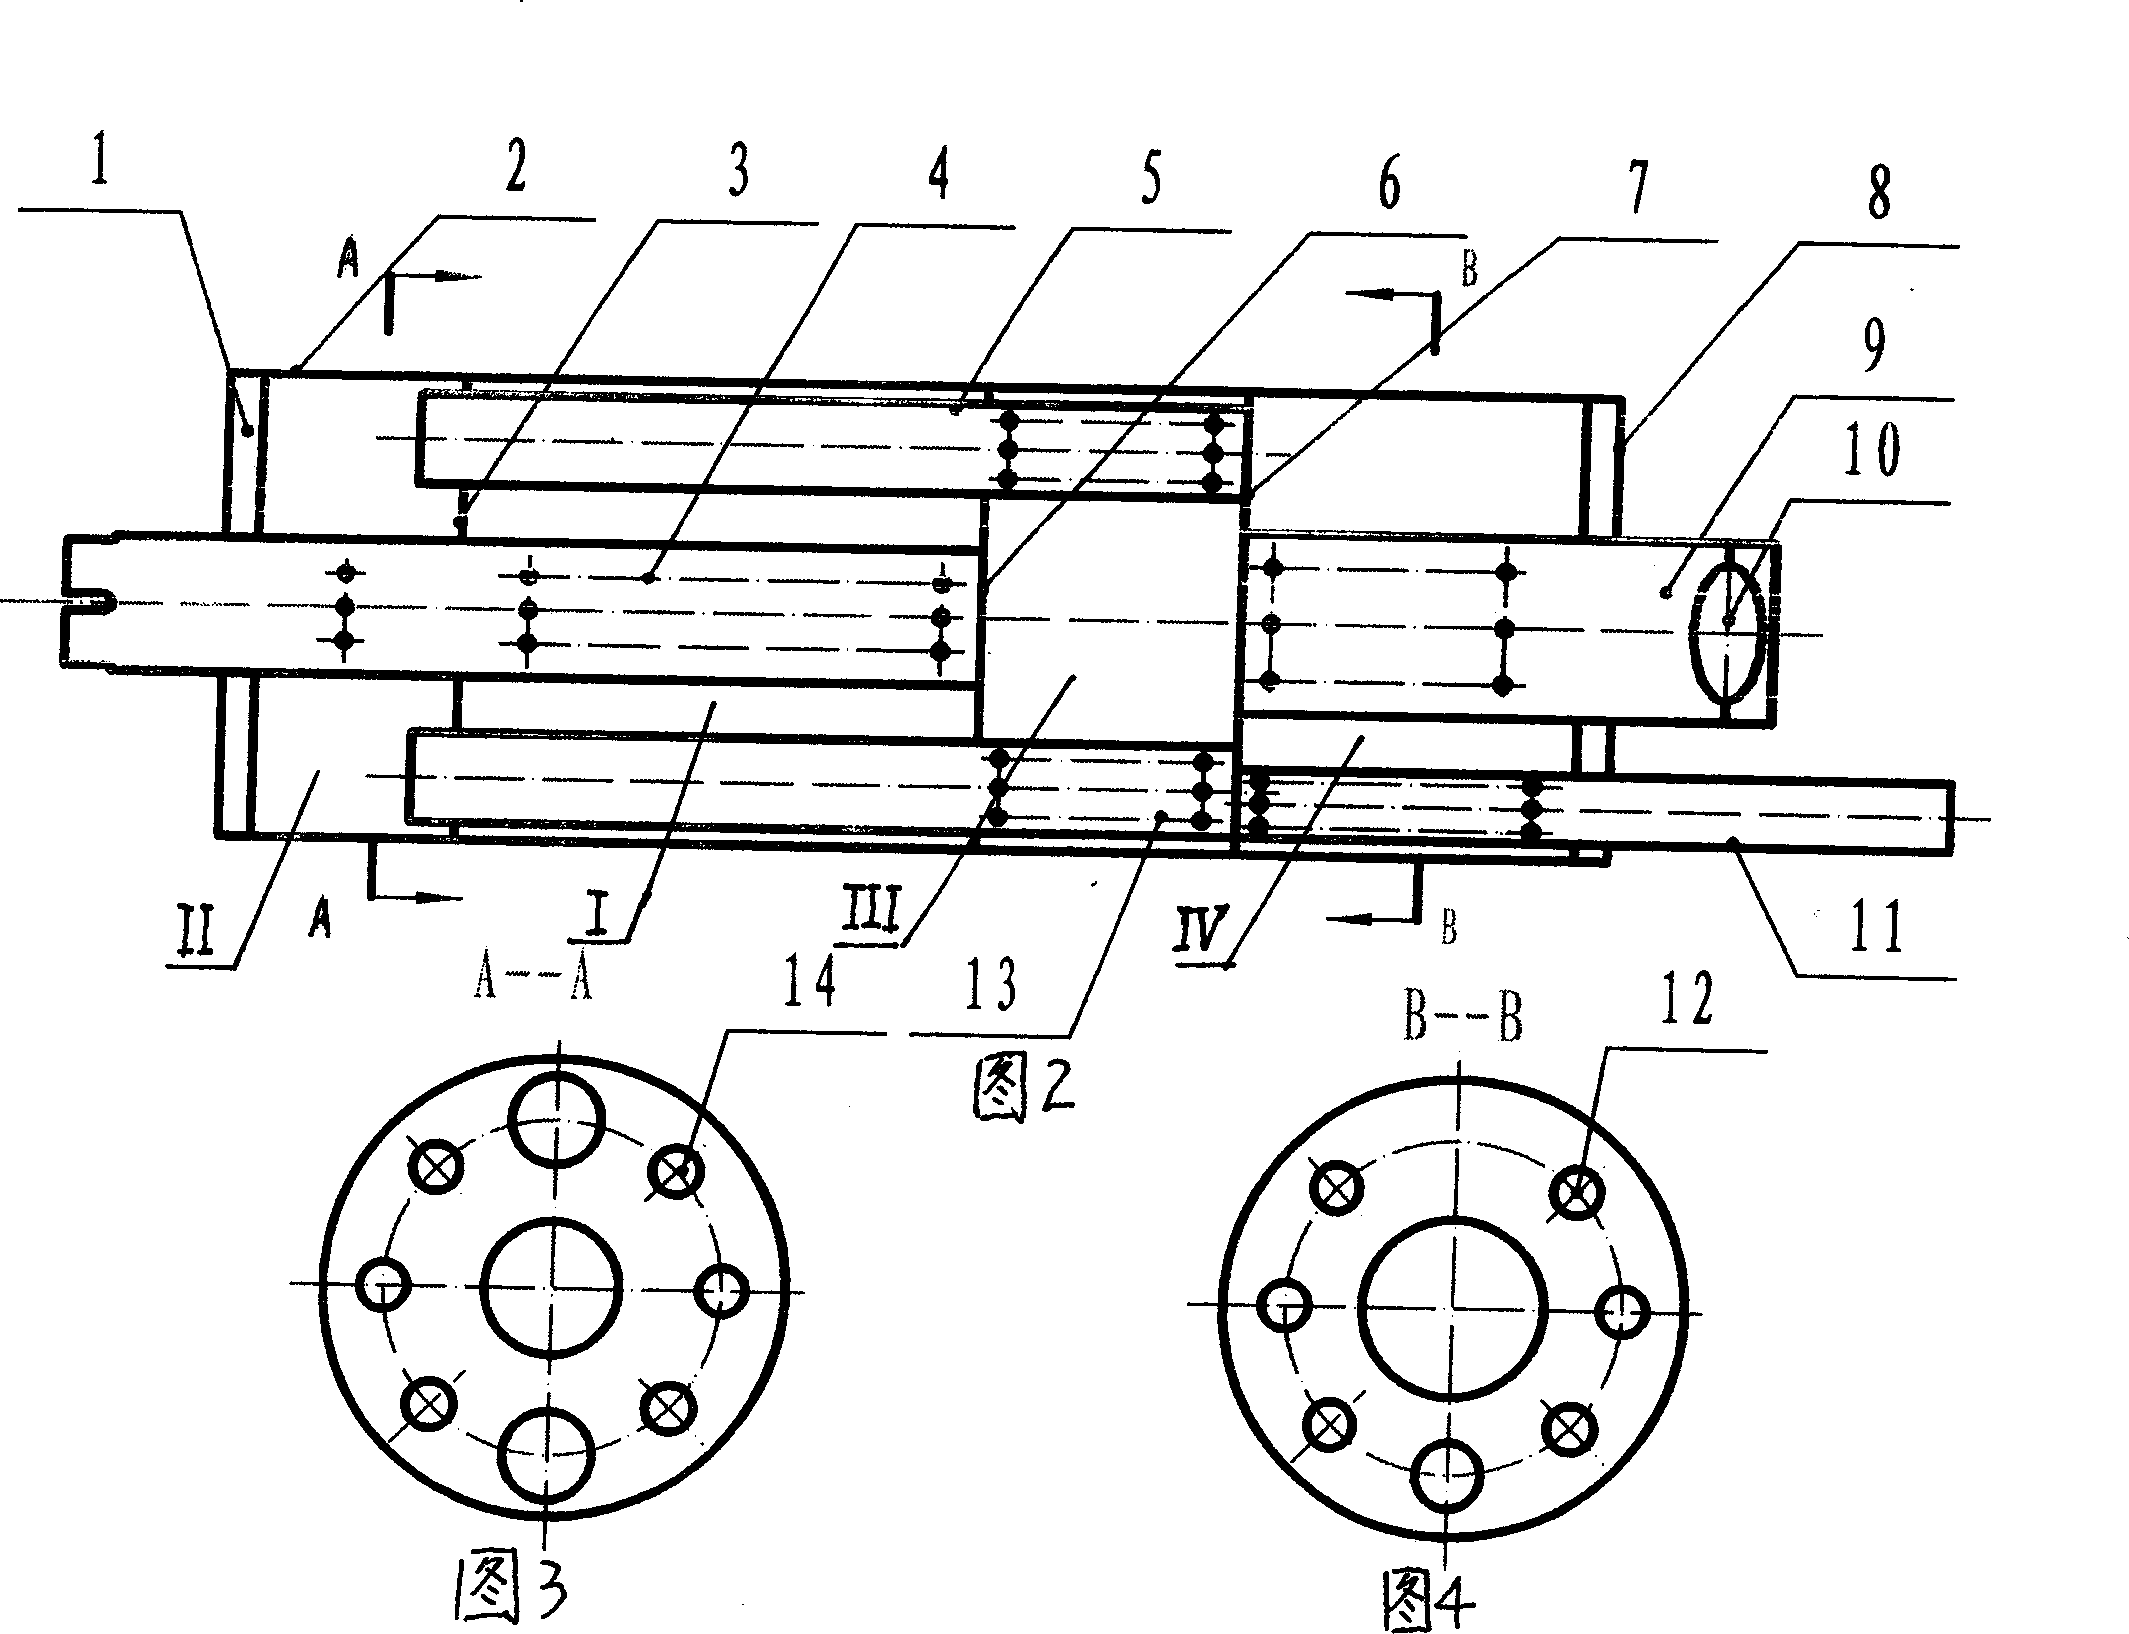 Internal combustion engine exhaust silencer with variable exhaust pipe cross section